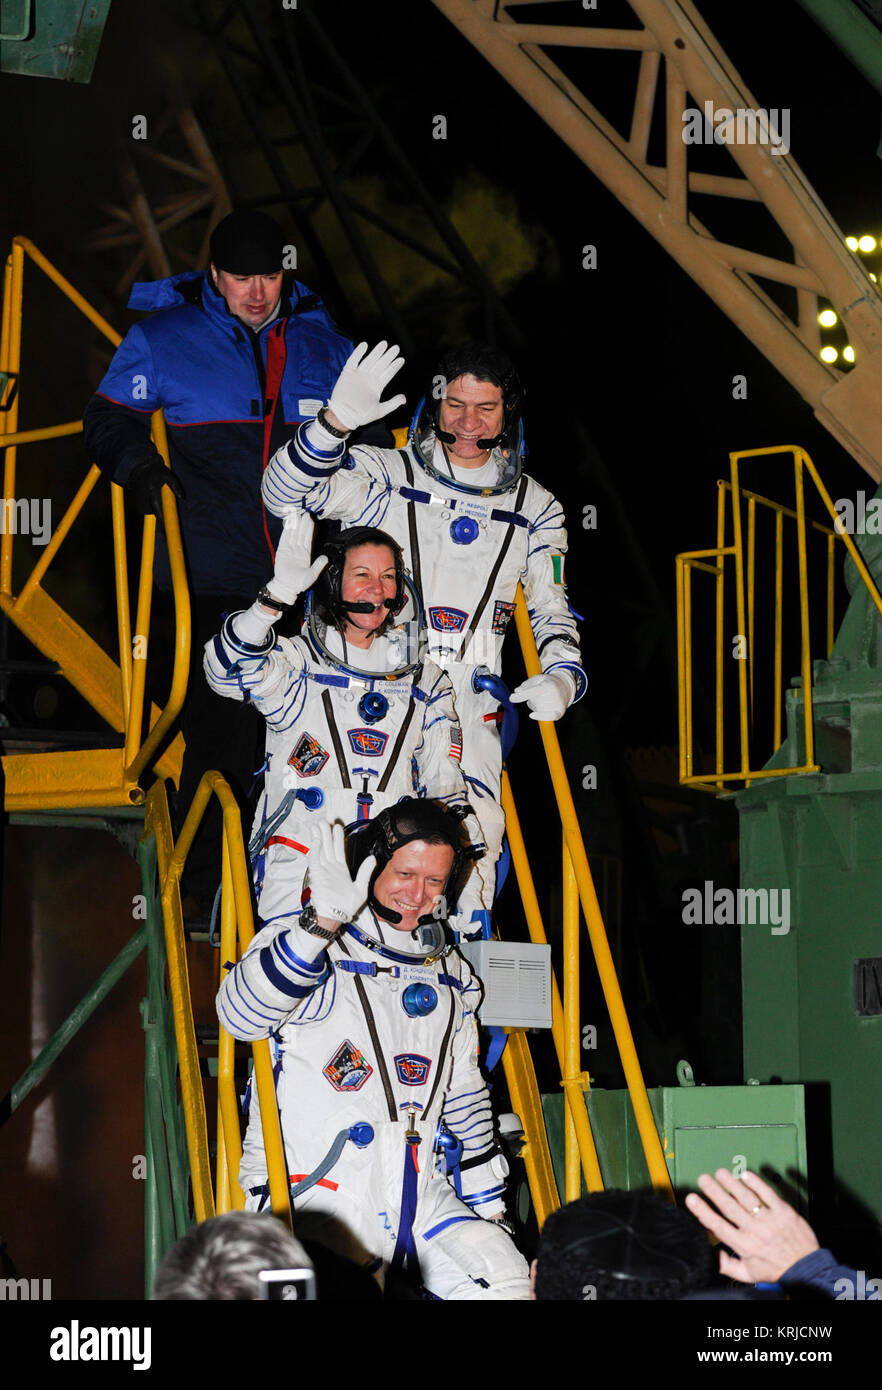 Expedition 26 crew members from bottom; Soyuz Commander Dmitry Kondratyev, NASA Flight Engineer Cady Coleman and European Space Agency Flight Engineer Paolo Nespoli, wave to the crowd prior to launching at the Baikonur Cosmodrome in Kazakhstan on Wednesday, Dec. 15, 2010.  (Photo Credit: NASA/Carla Cioffi) Soyuz TMA-20 crew members wave farewell Stock Photo